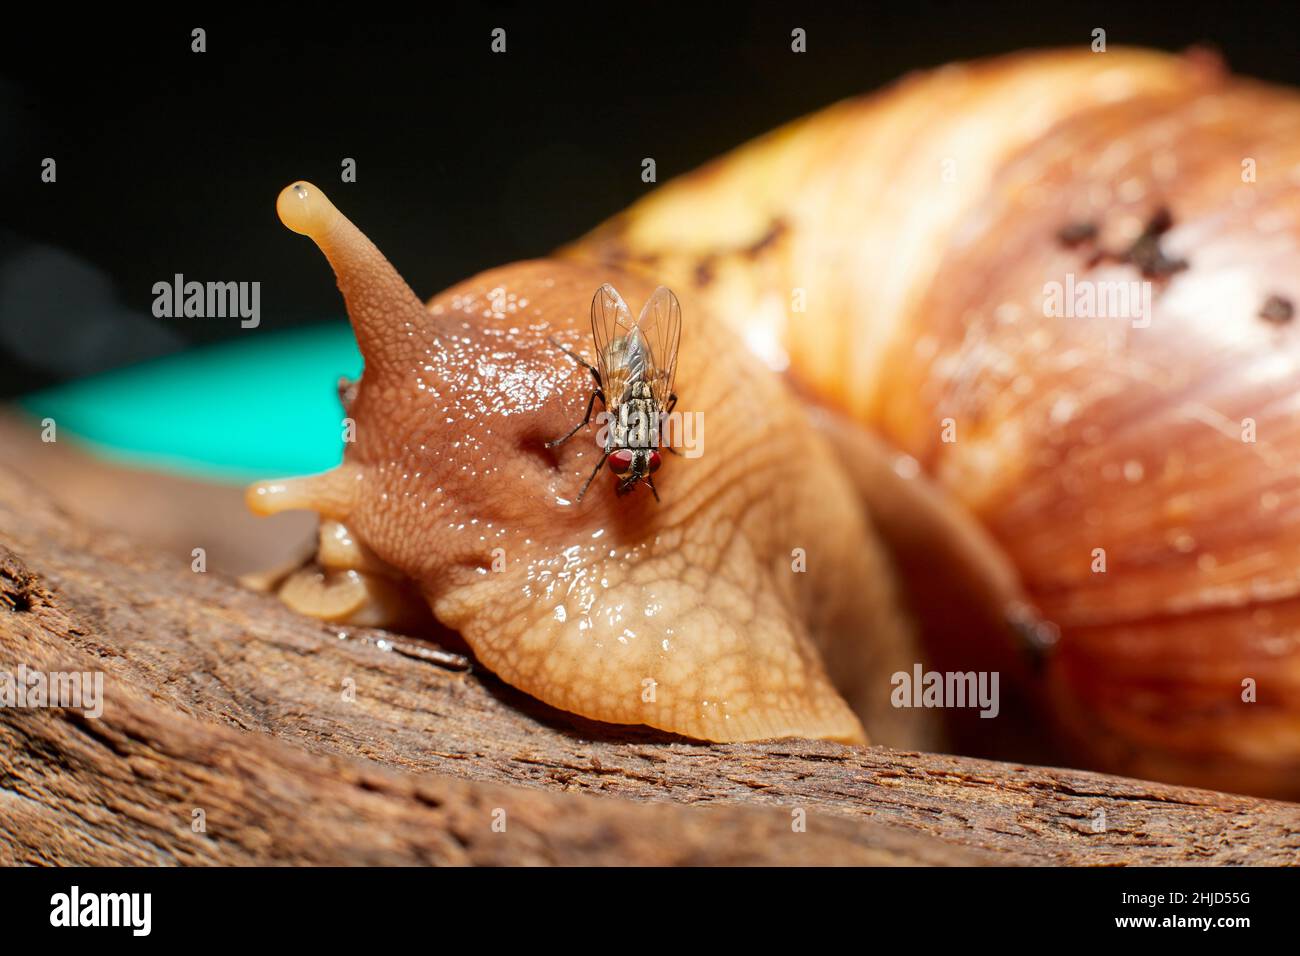 An African land snail on a piece of brown driftwood Stock Photo